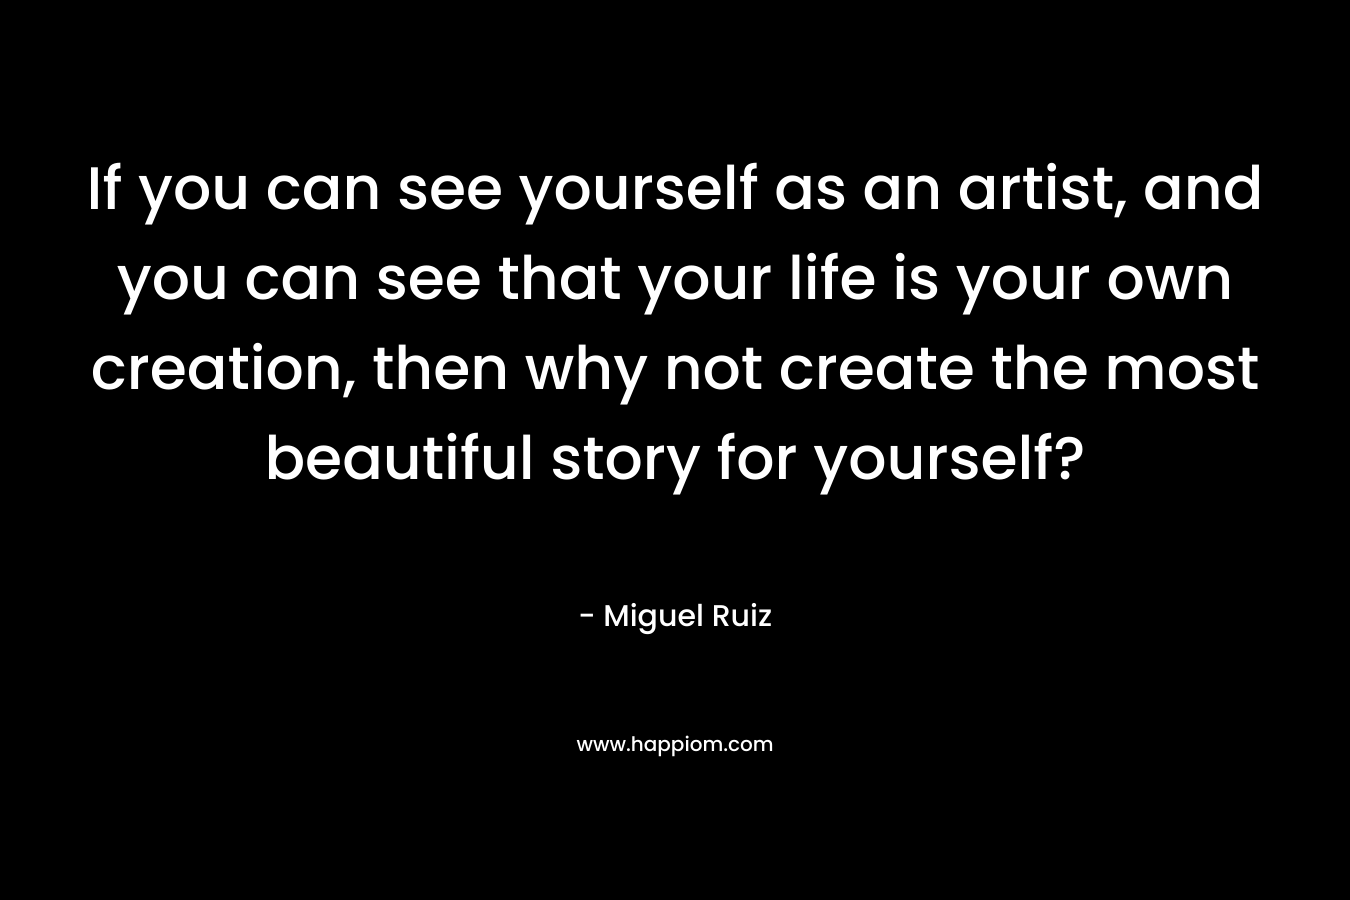 If you can see yourself as an artist, and you can see that your life is your own creation, then why not create the most beautiful story for yourself?